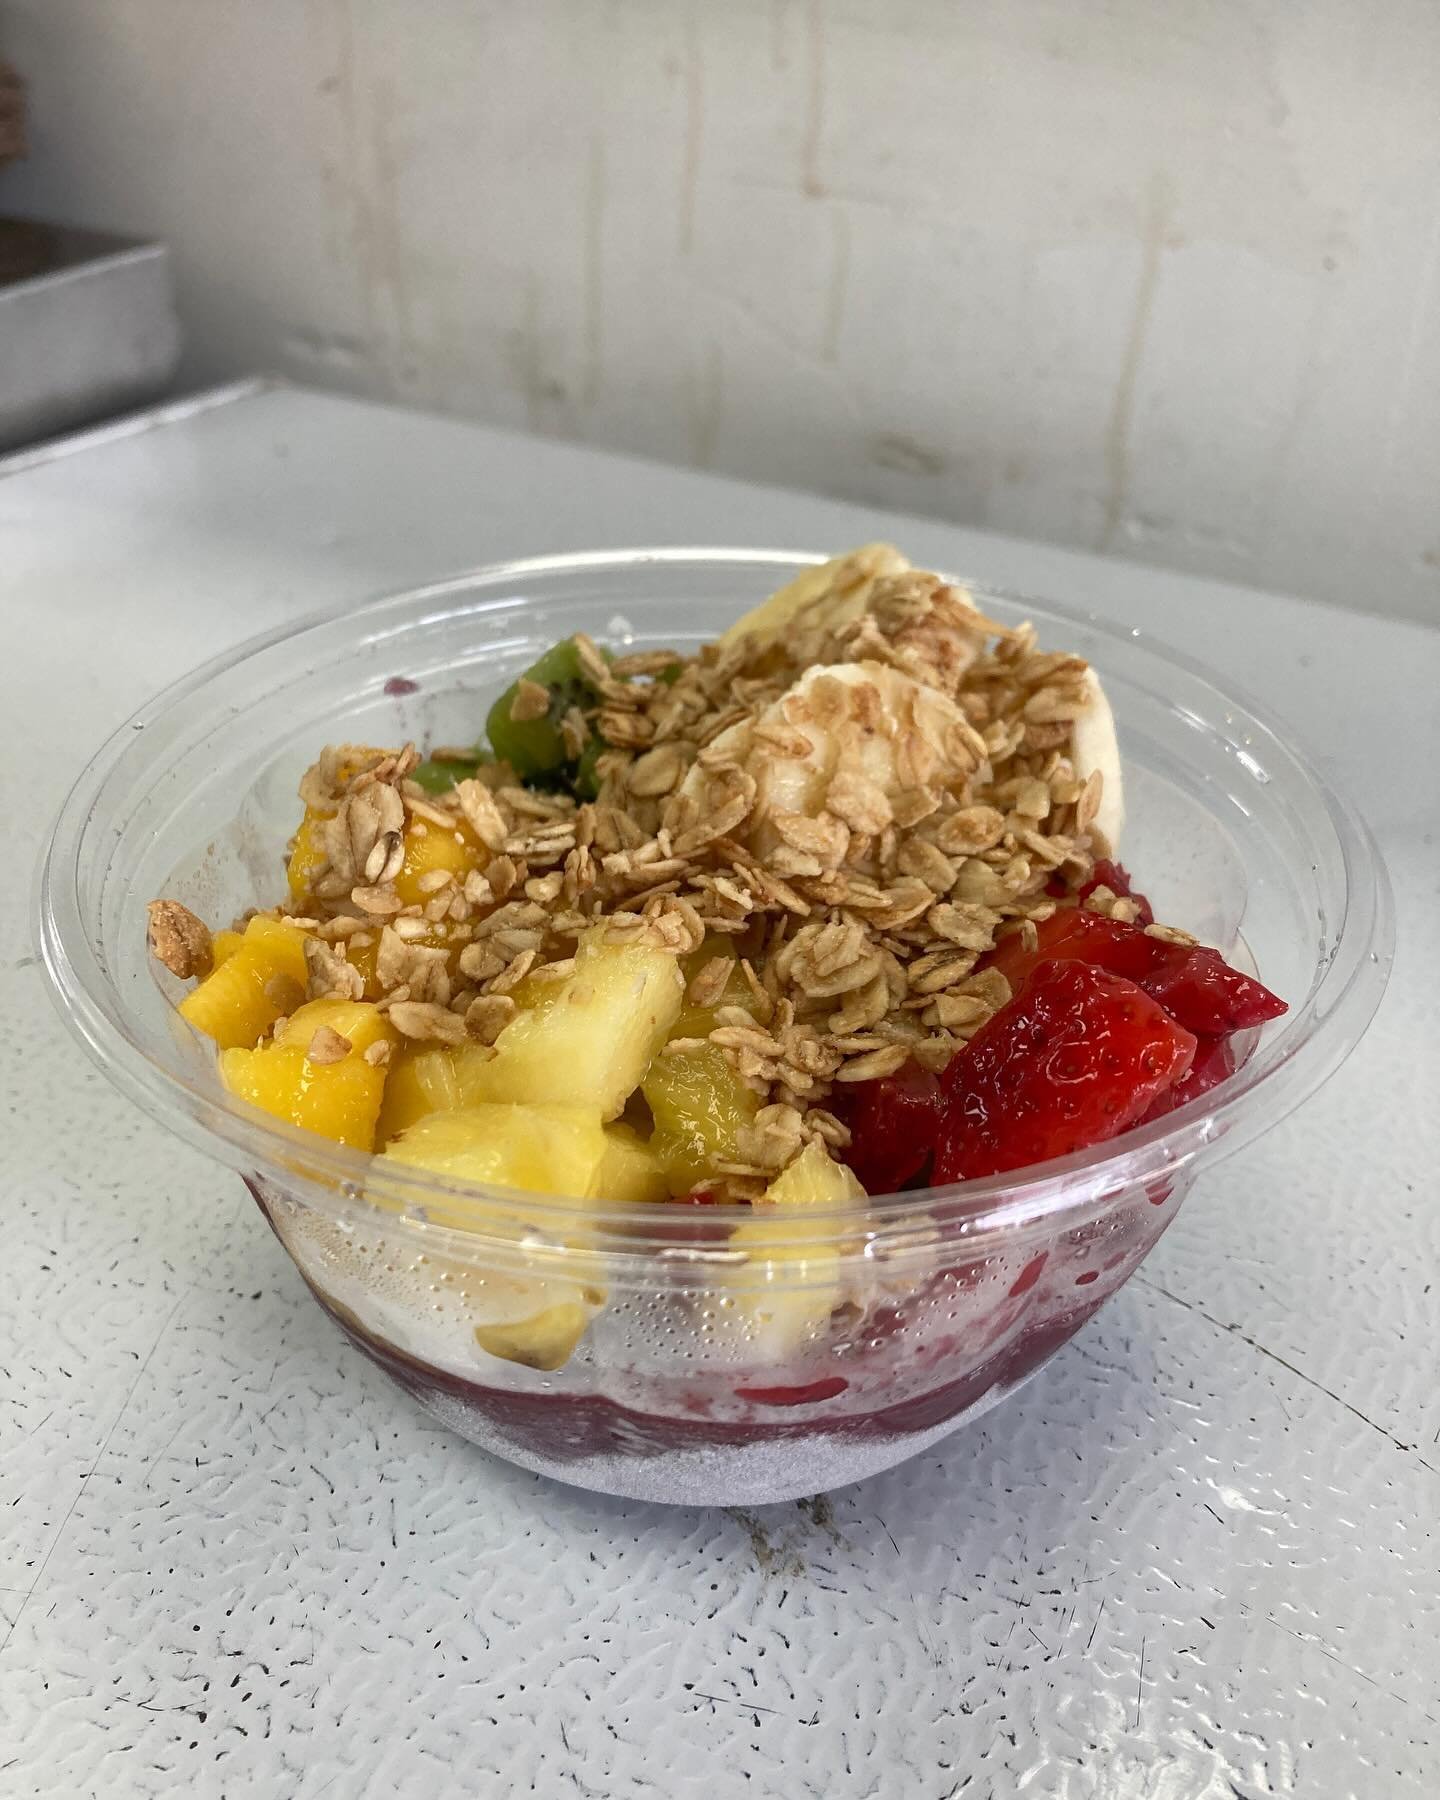 Craving #chametz but need to get your health goals back on track? 

Come on into @thejuicemafia for any one of our healthy and delicious menu items! 

We can&rsquo;t wait to dig into an #acaibowl with granola and #peanutbutter 

Looking forward to en